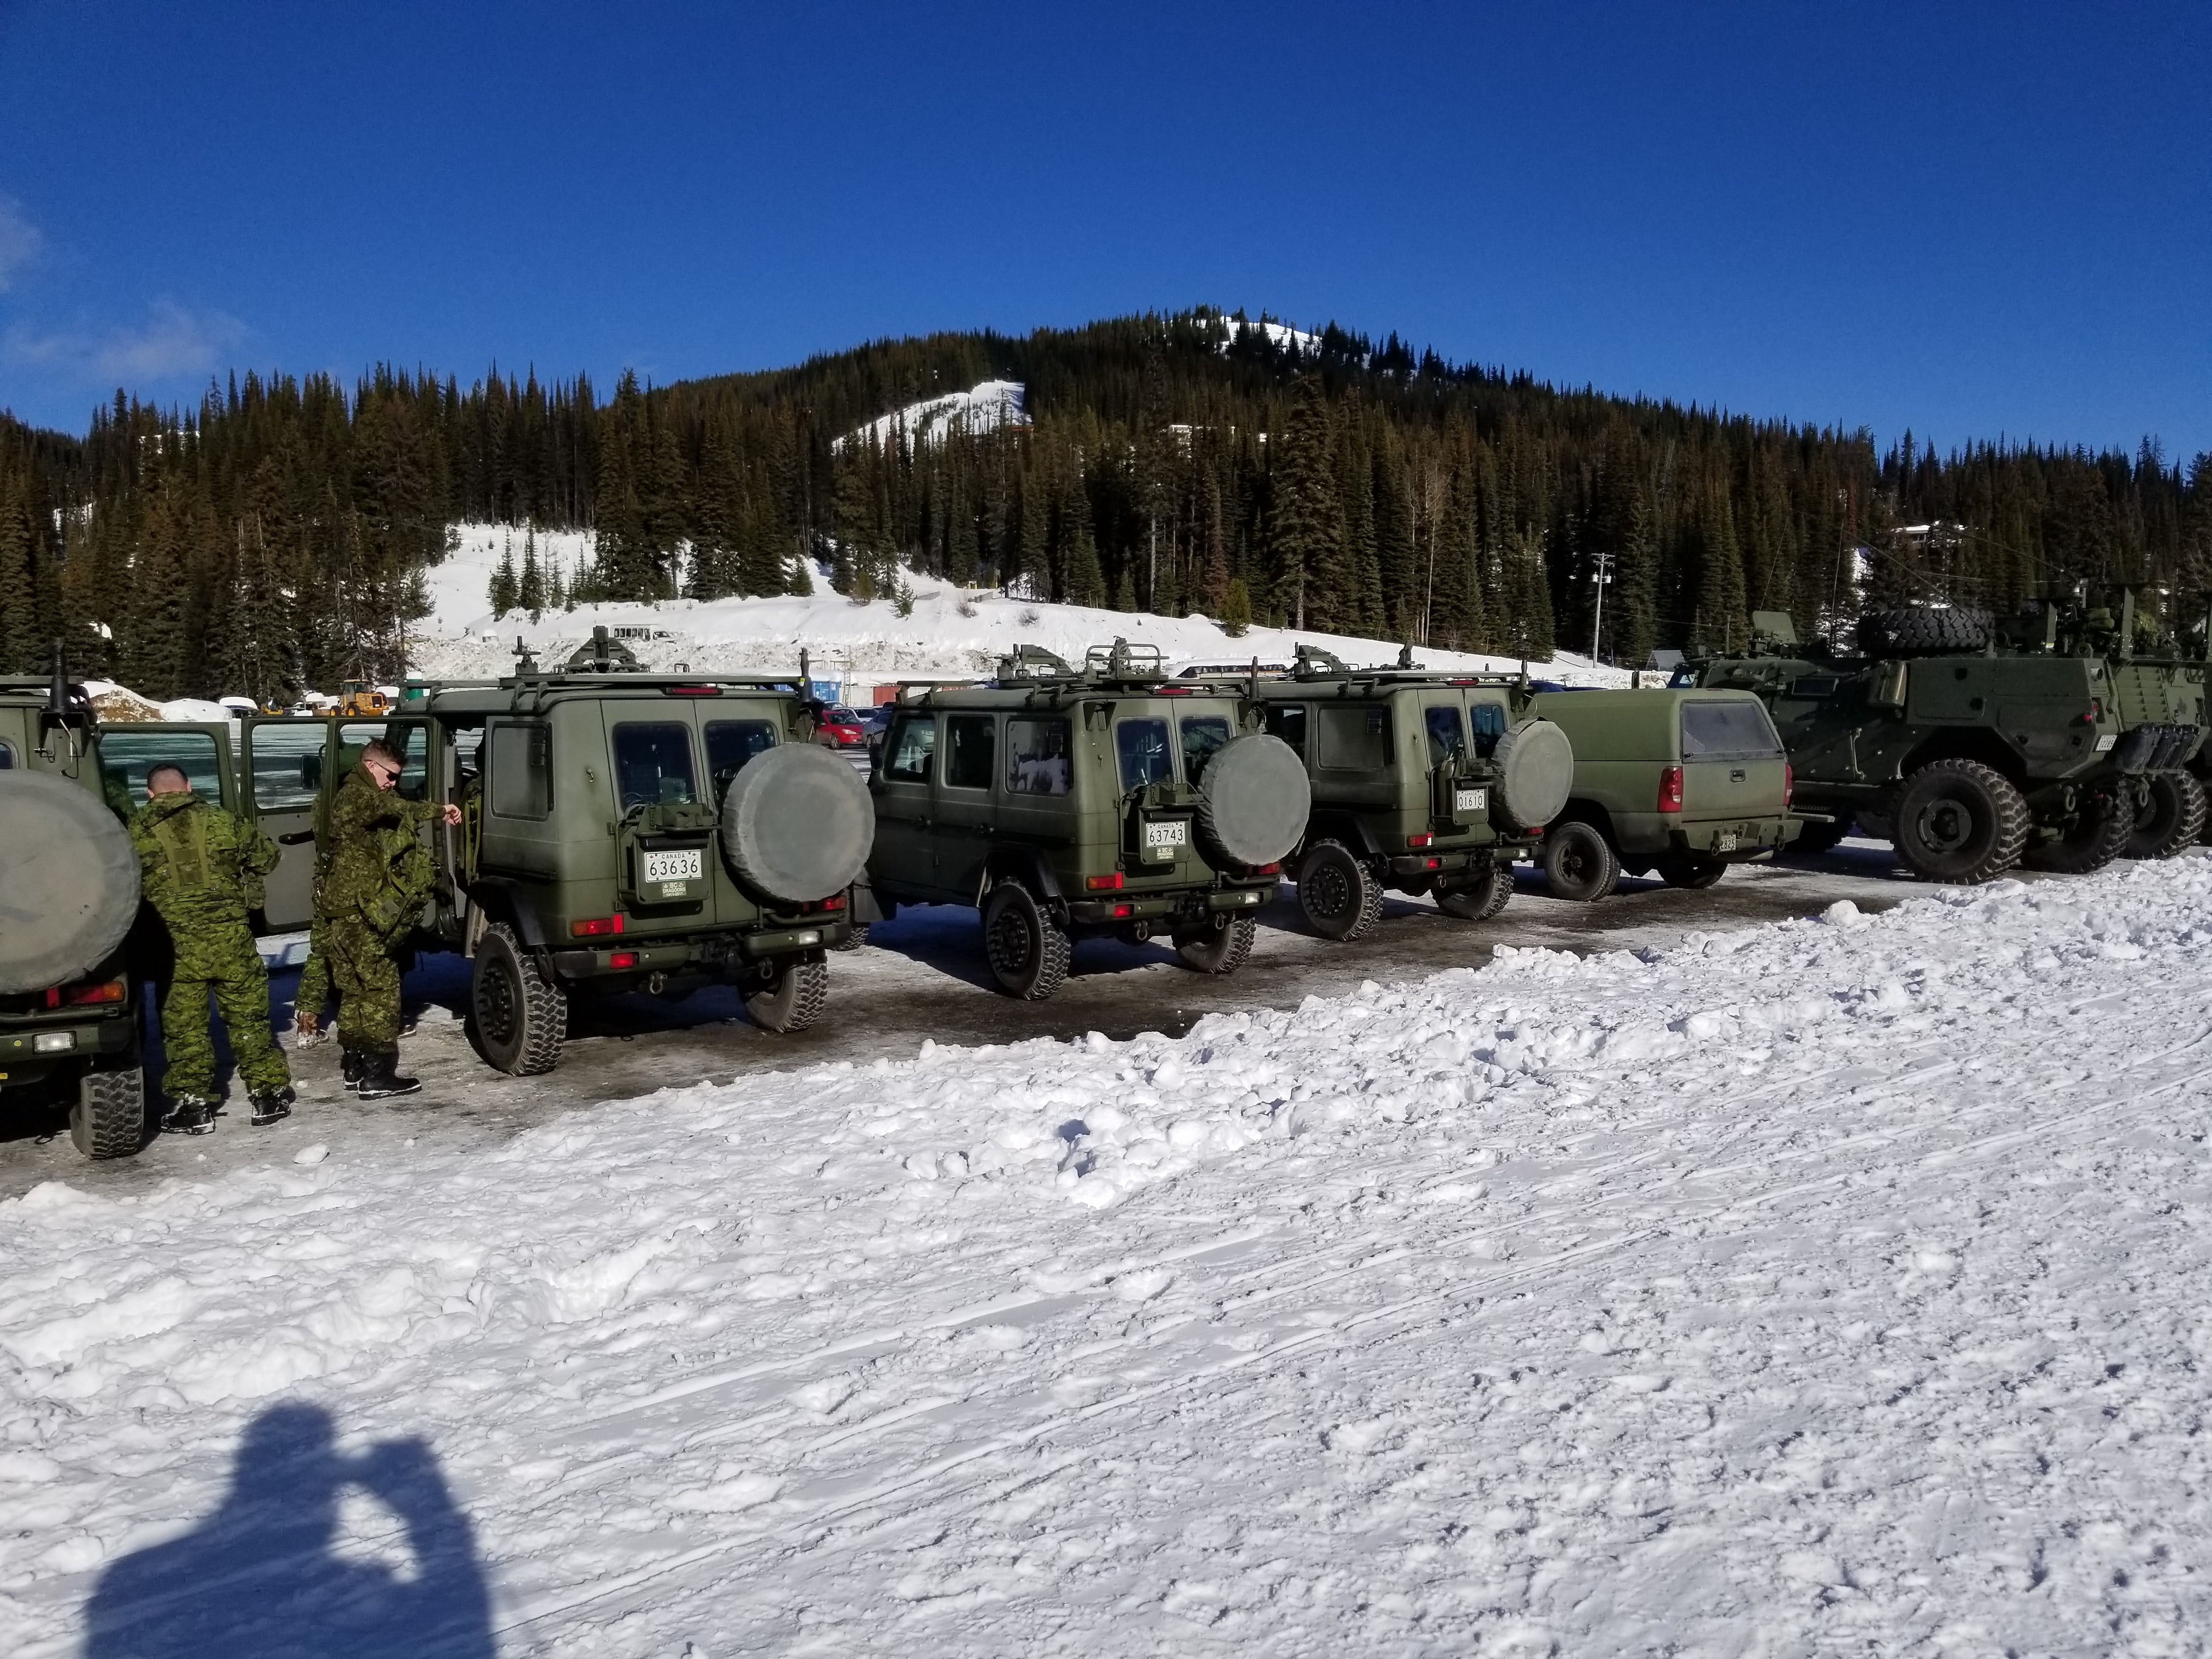 BCD LUVW and TAPV's at the base of Silver Star Resort